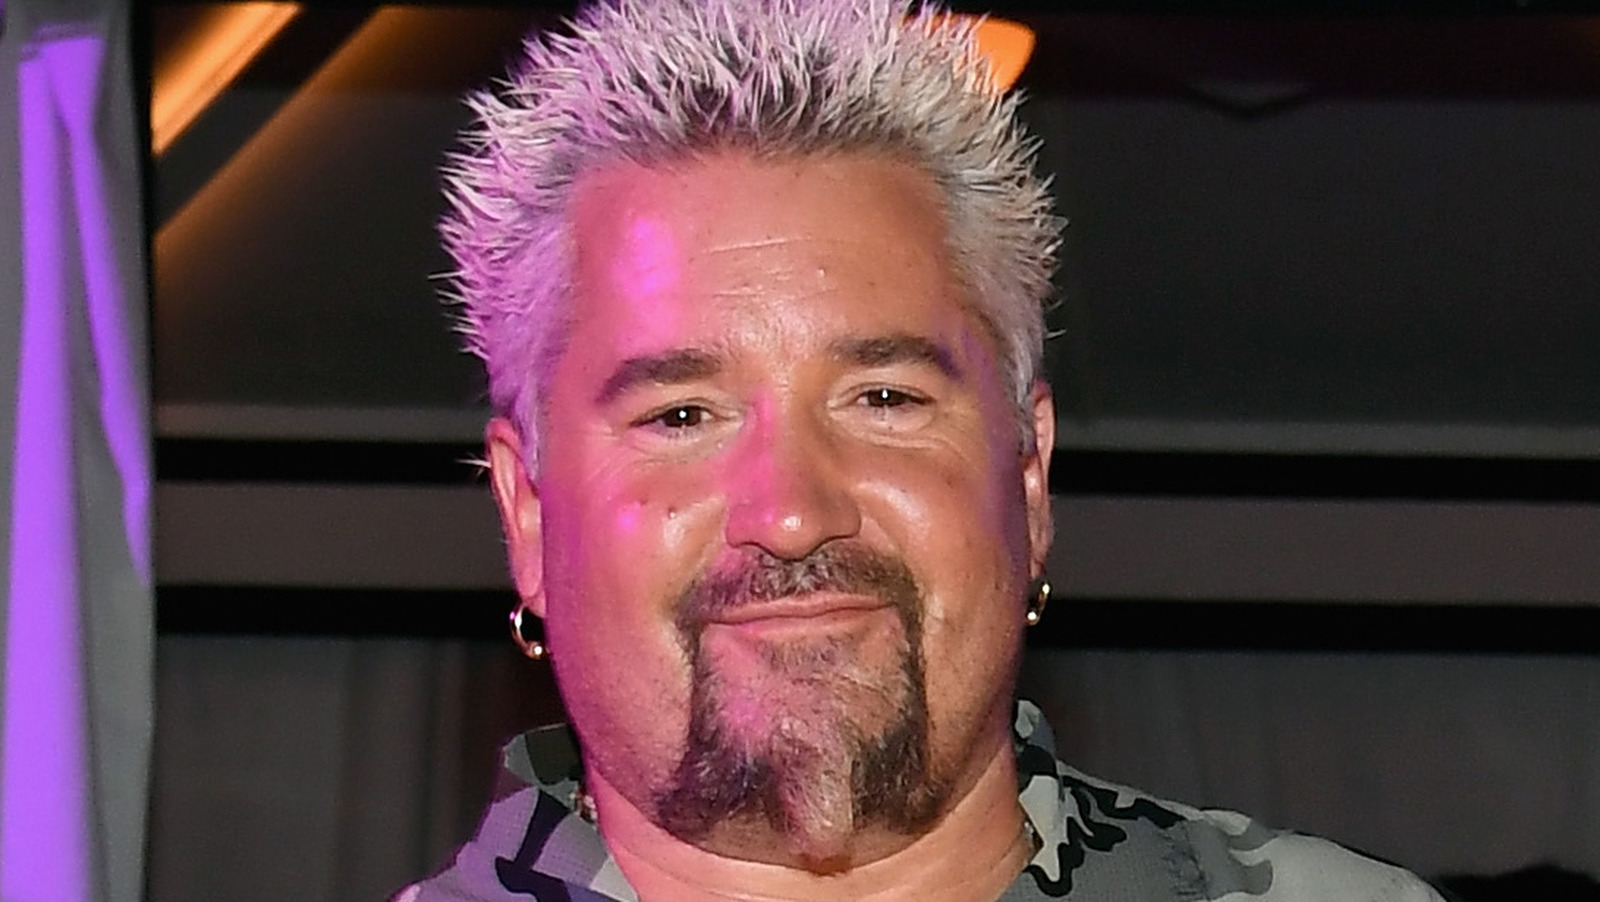 https://www.thelist.com/img/gallery/how-guy-fieri-feally-acts-if-you-run-into-him-at-the-store/l-intro-1623257787.jpg